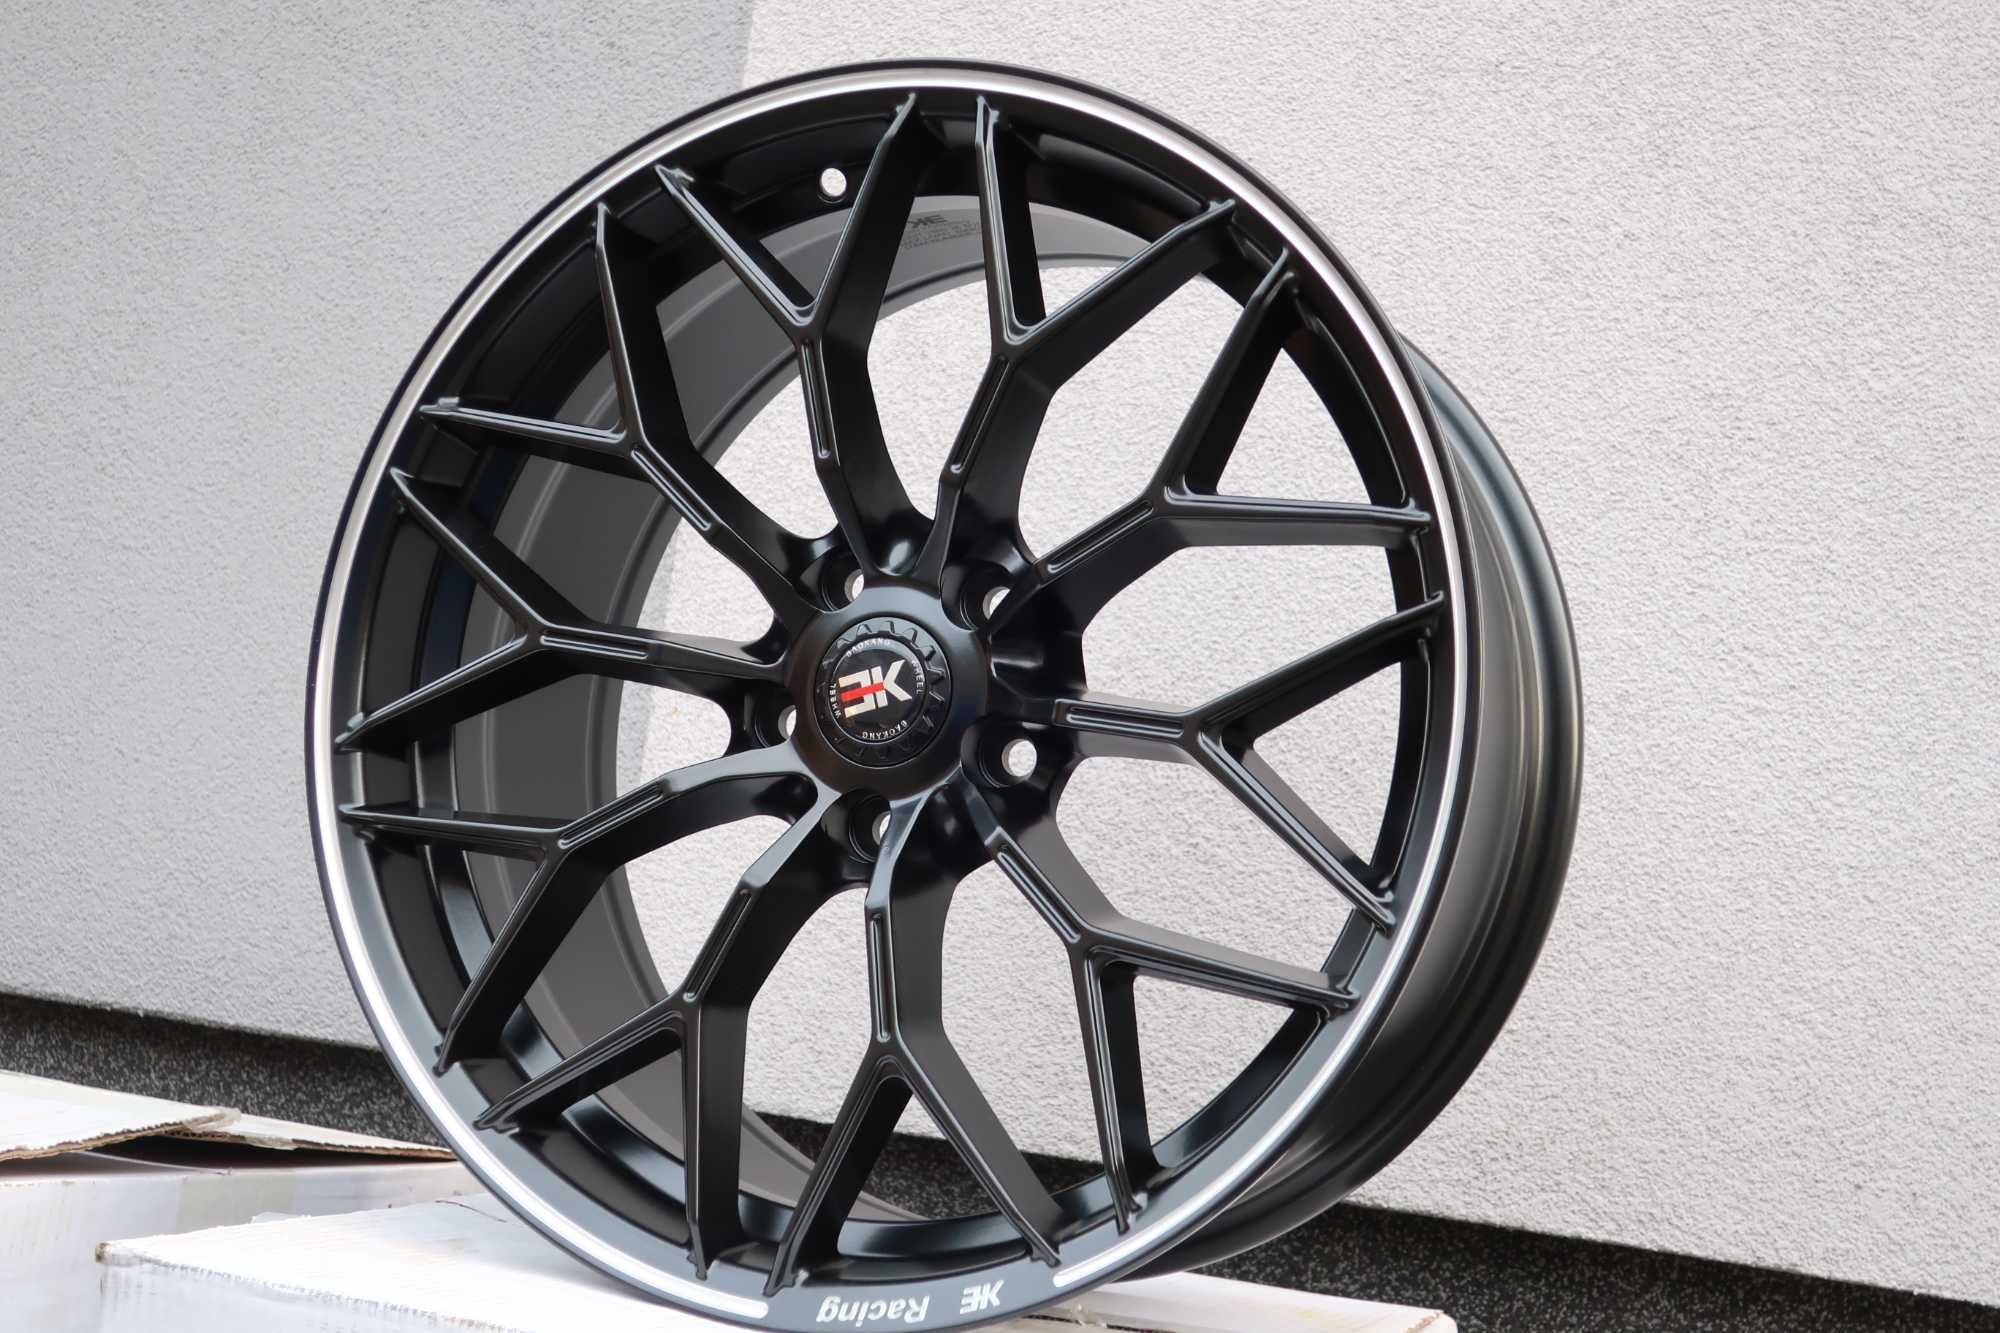 FELGI 19 5X114,3 8,5/9,5 ford mustang nissan 350z genesis coupe